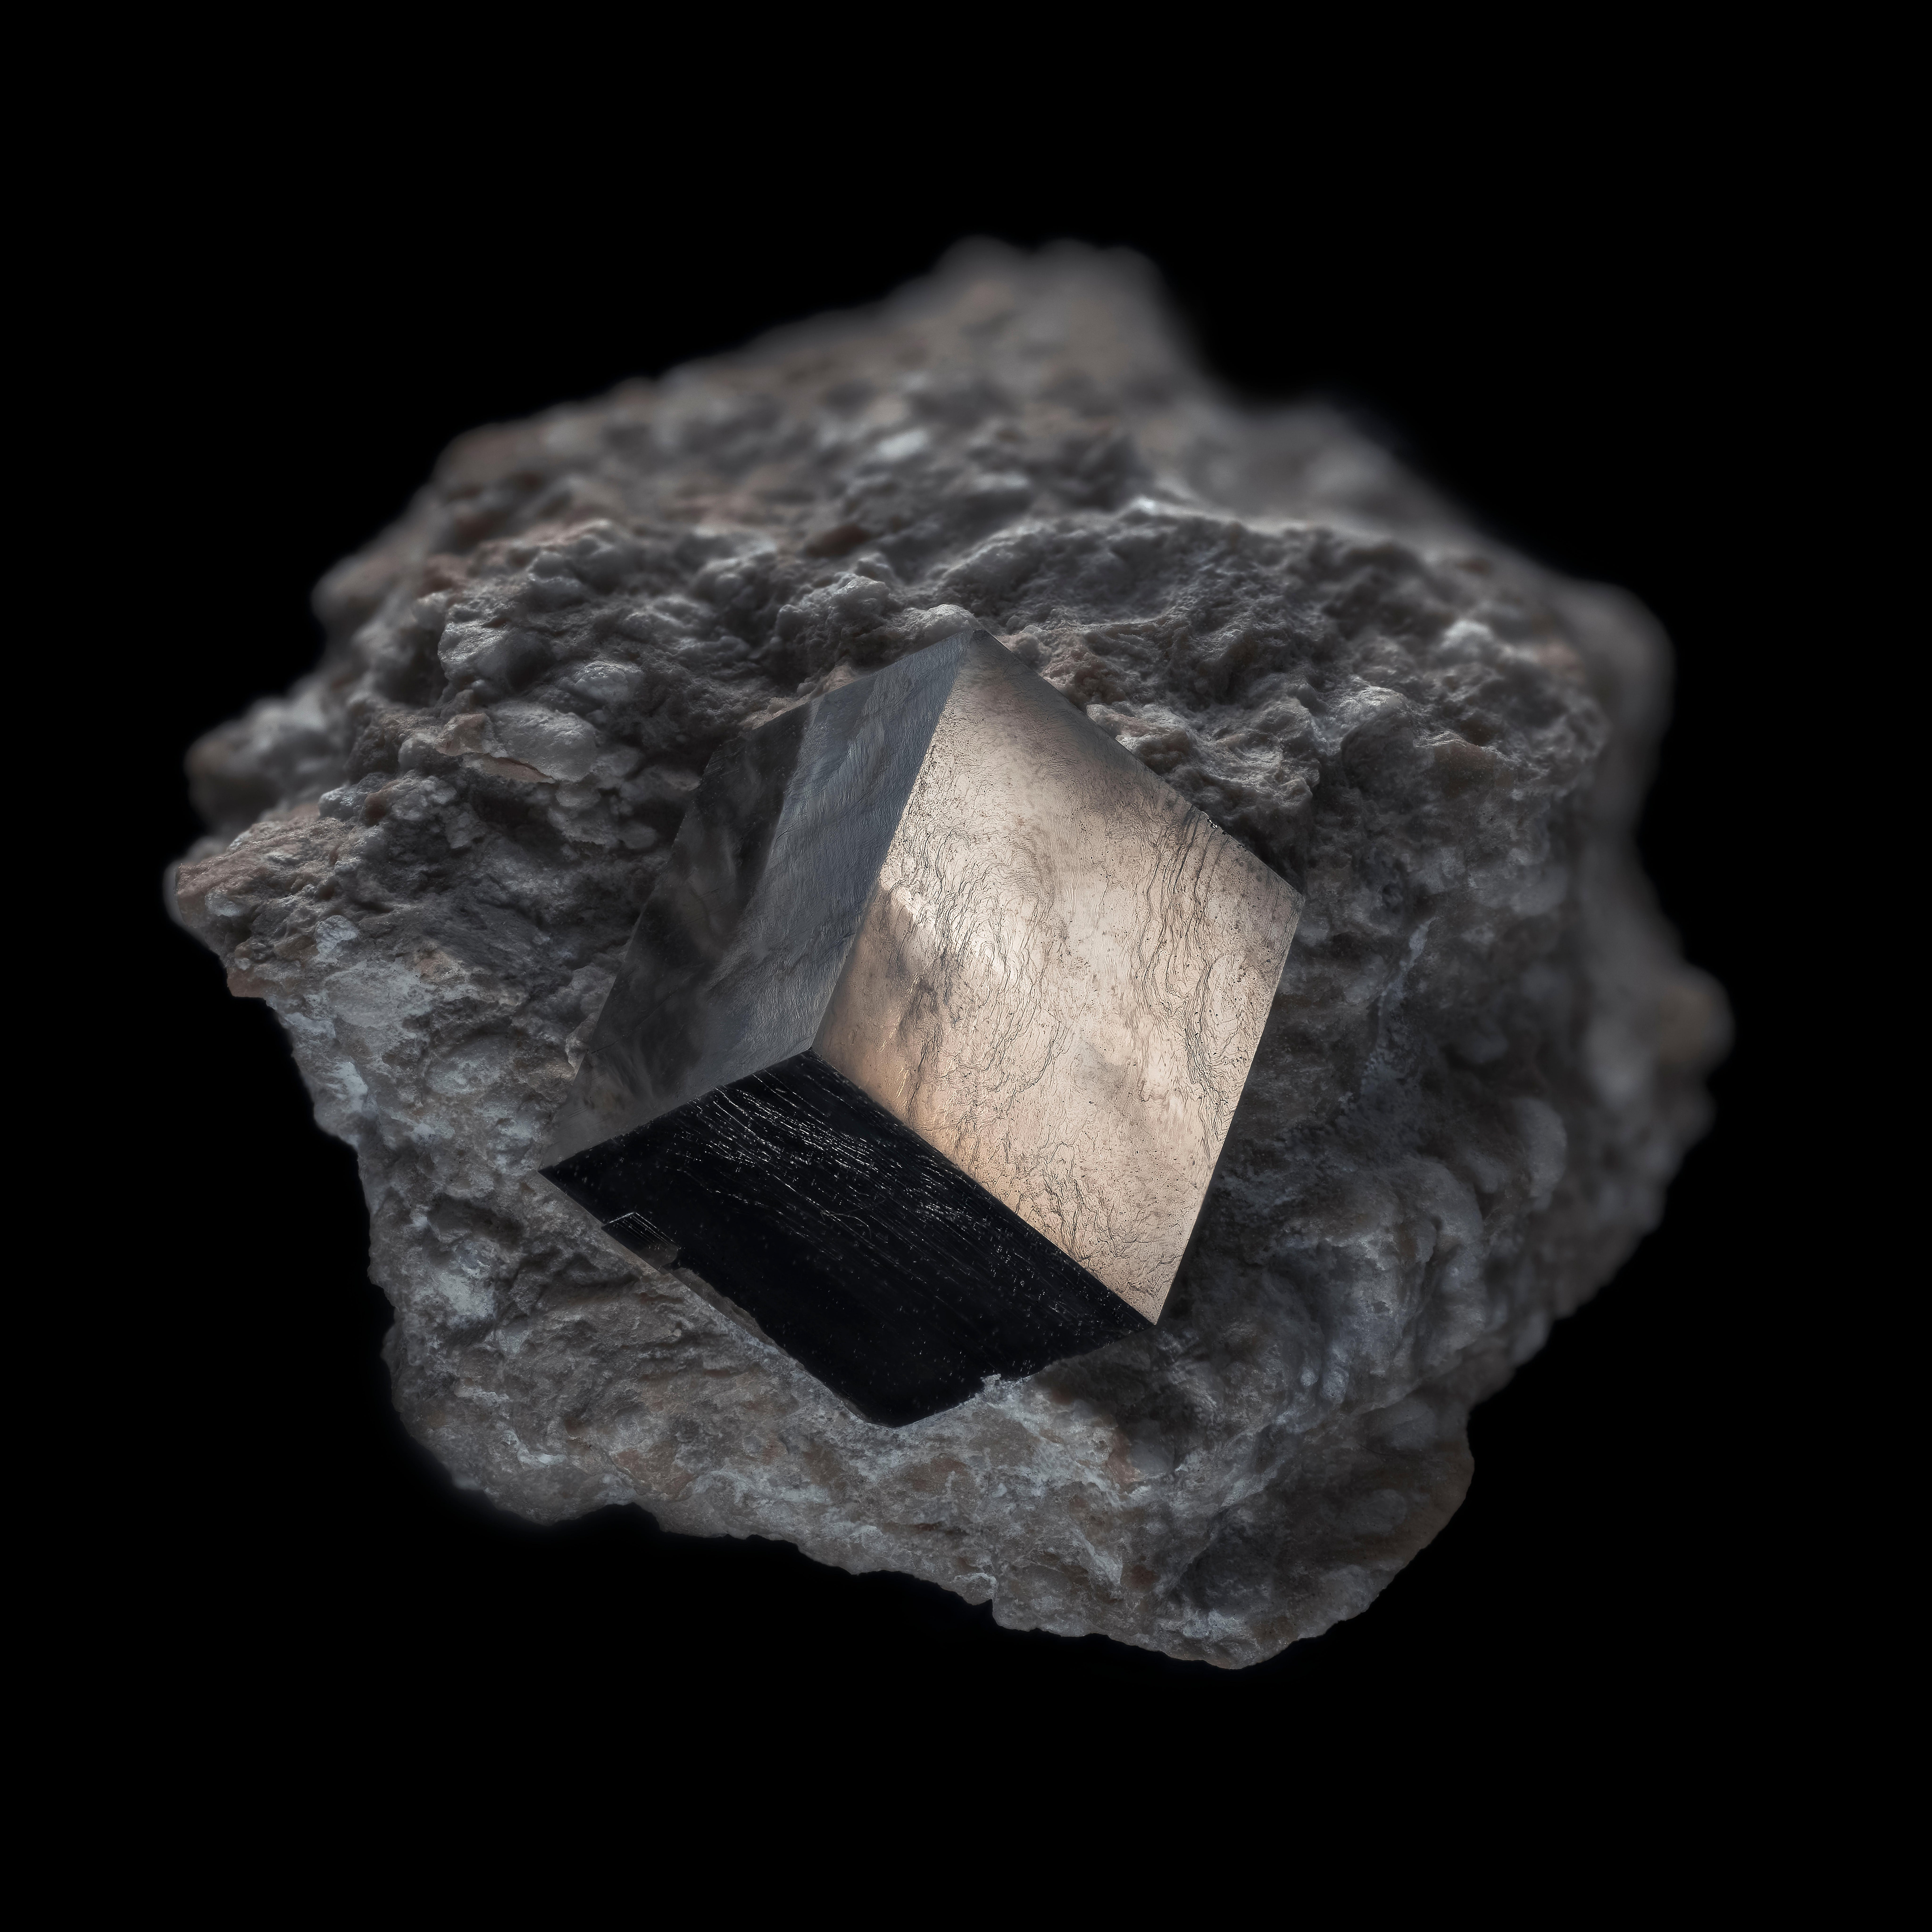 Christian Houge Color Photograph - `Pyrite Cube`, Oslo. Edition 3. - `In;Human Nature`  mineral rock nature jewel